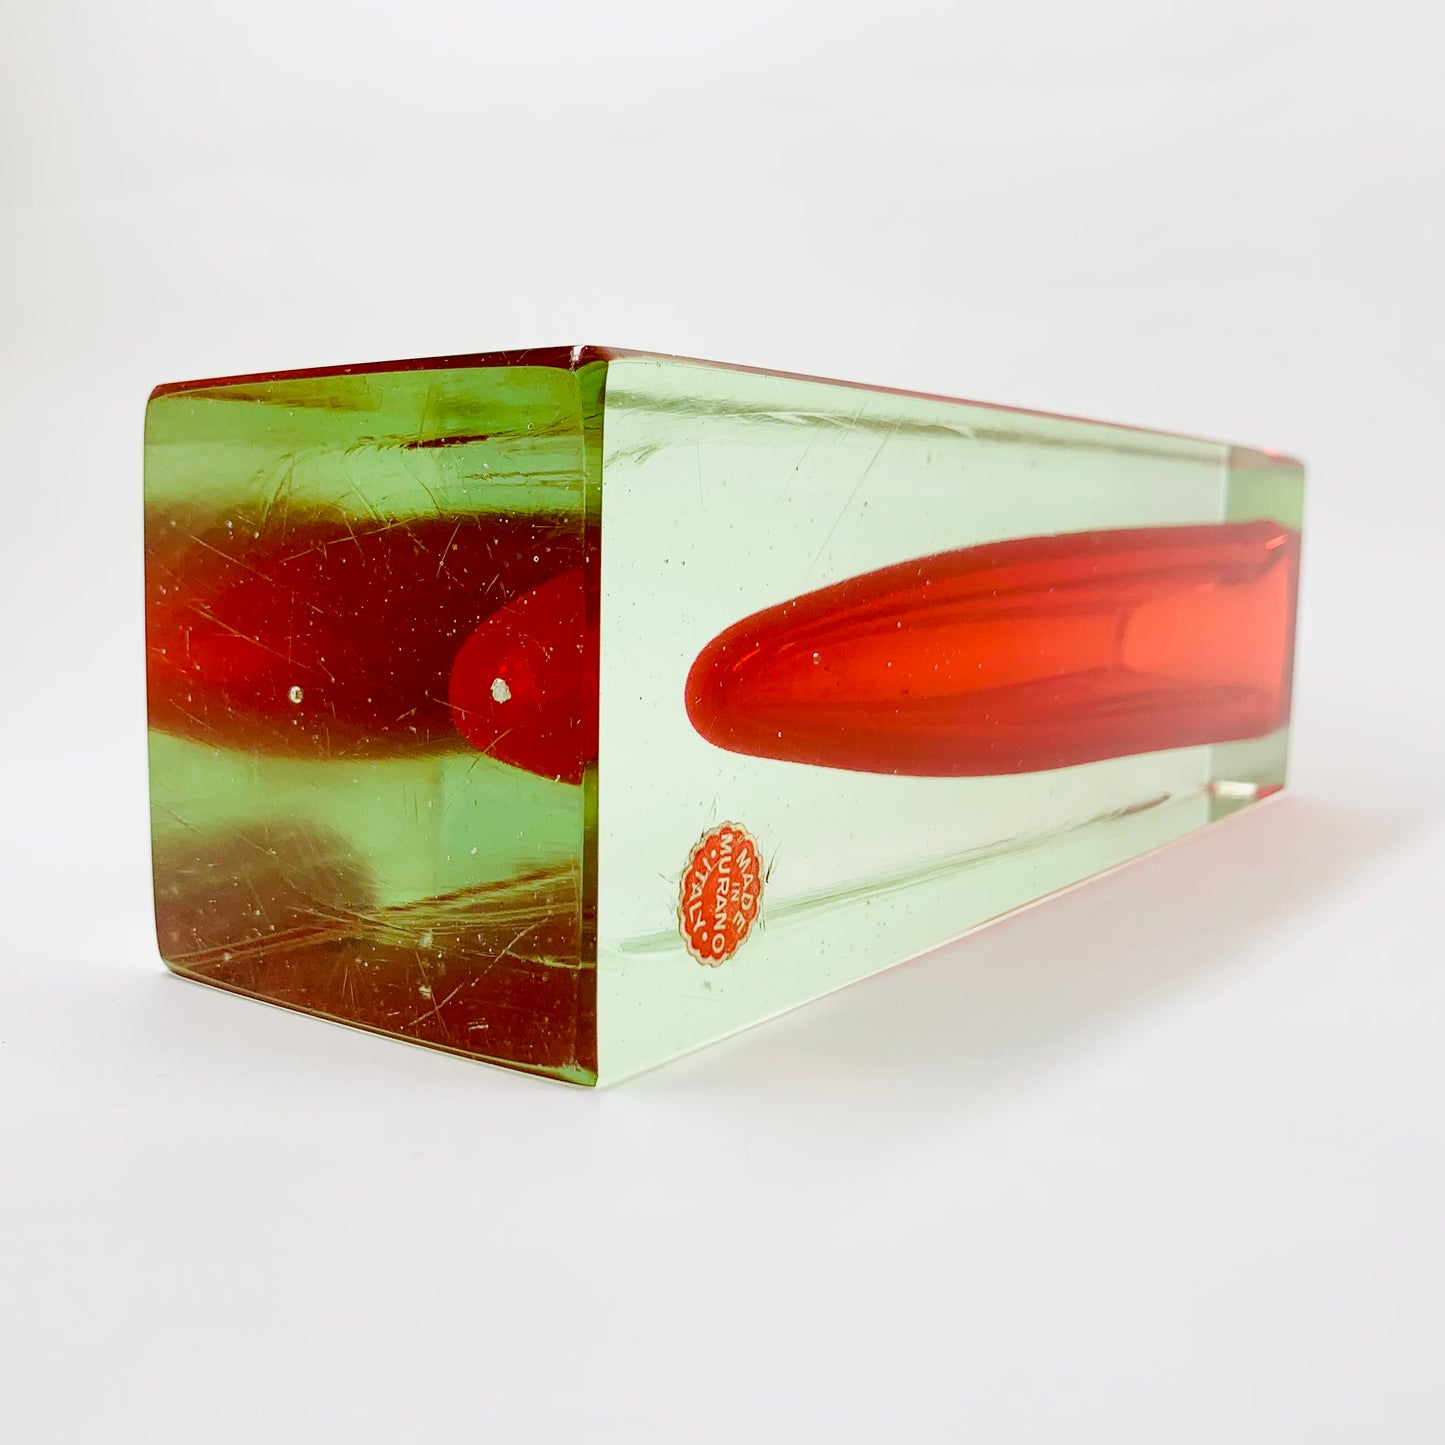 Large MCM red cased green Murano sommerso glass block vase by Mandruzatto